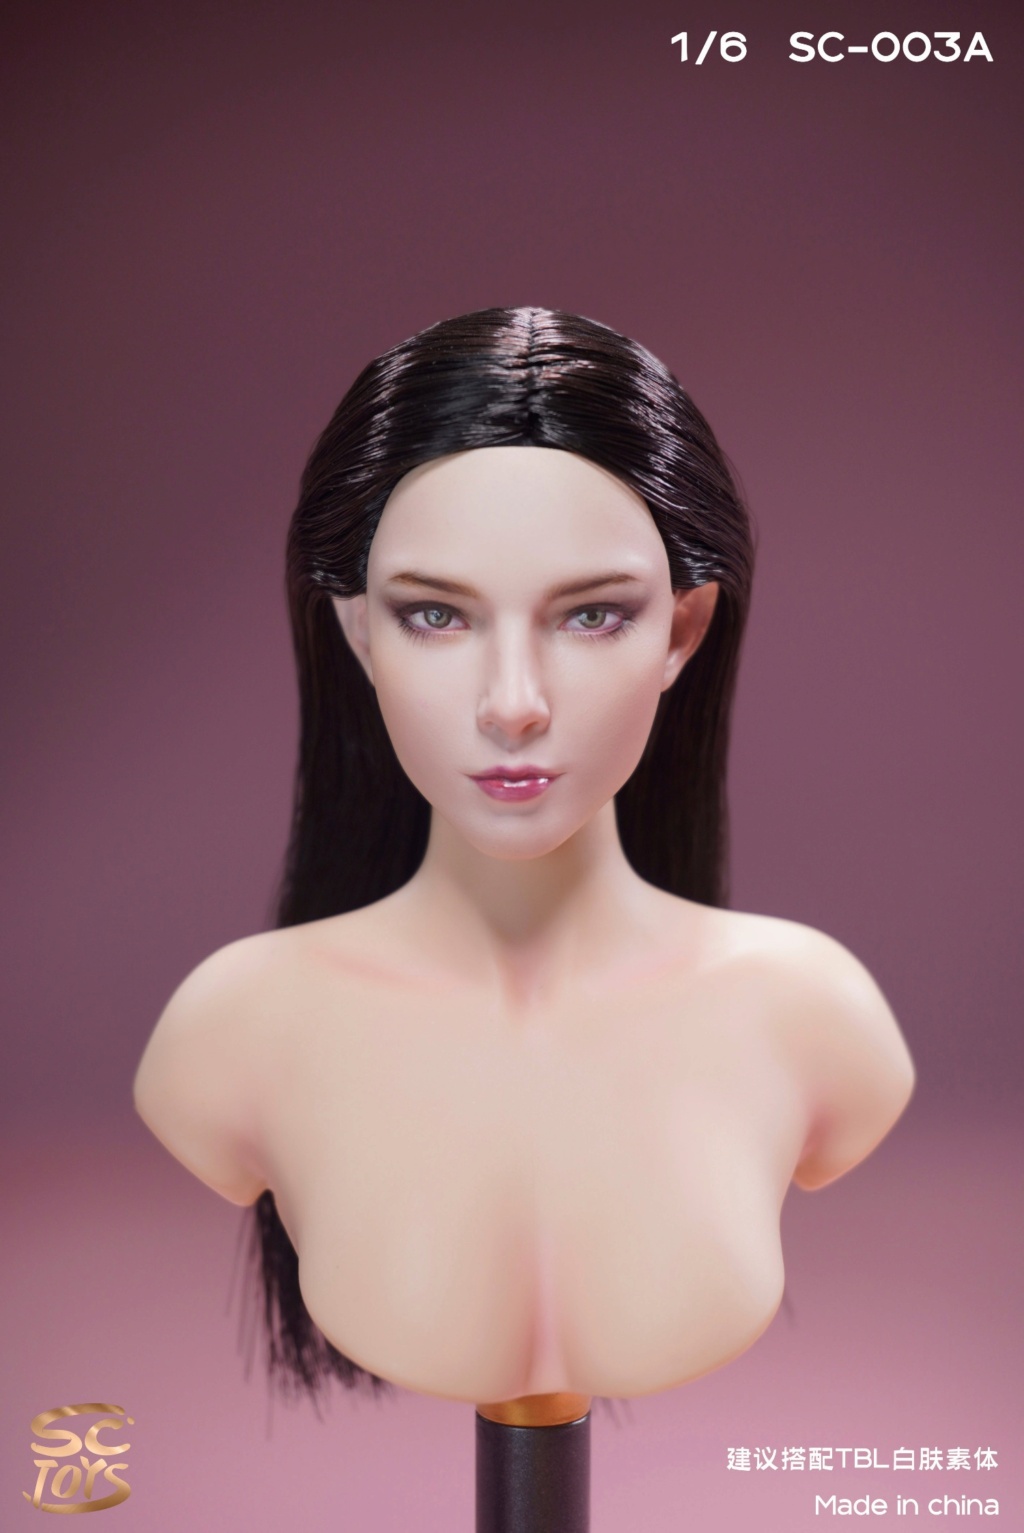 NEW PRODUCT: SCToys: 1/6 European and American head sculpture - LaLi - three hairstyles #SC003A/B/C 20570210